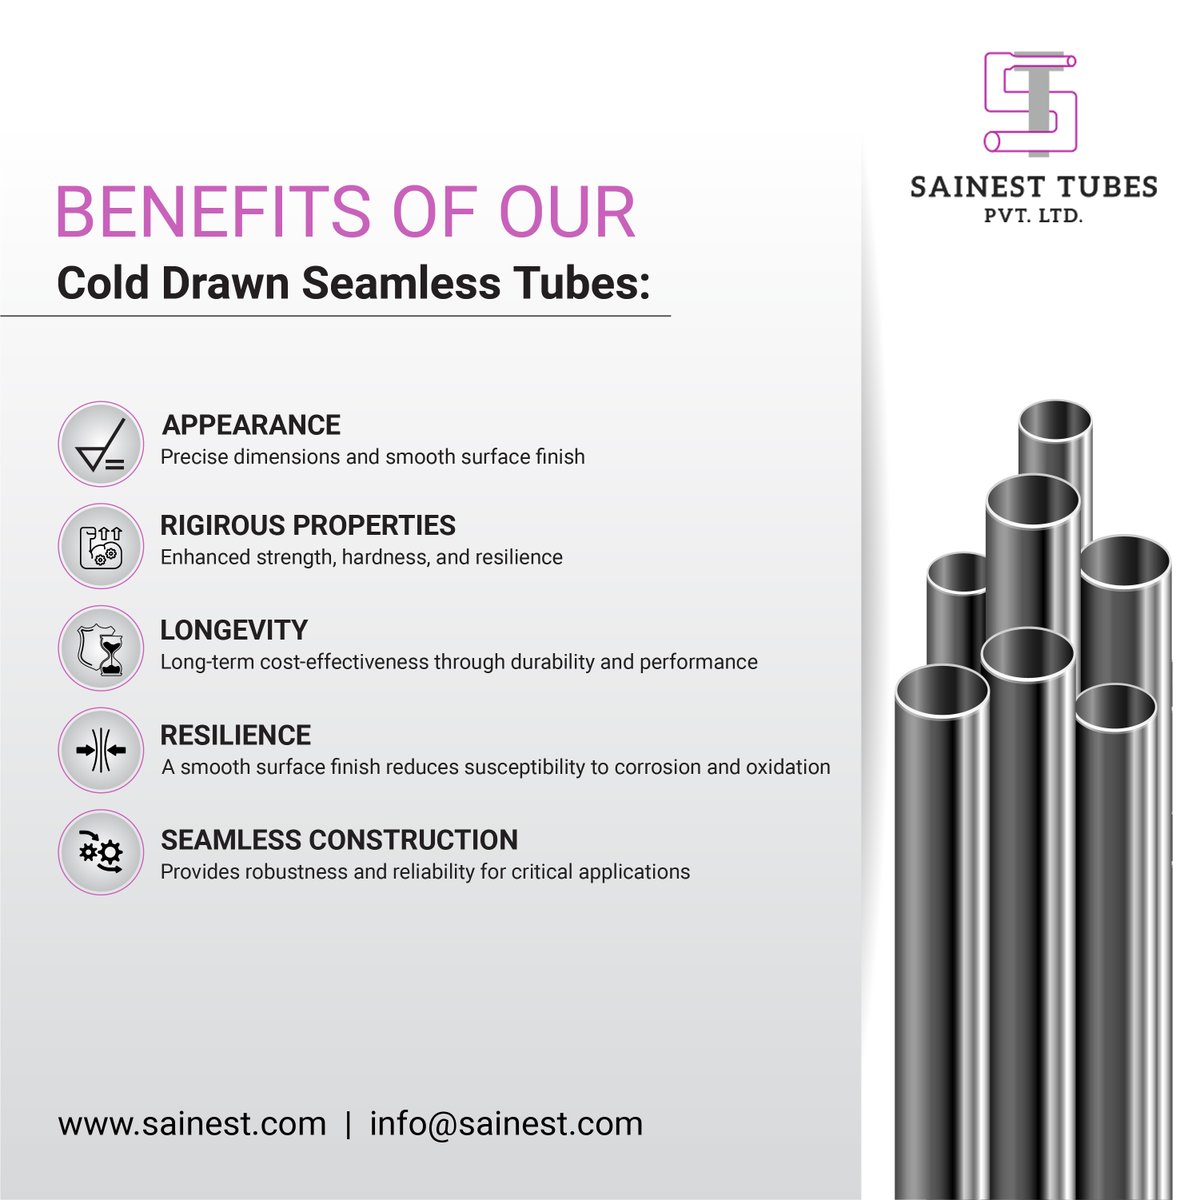 Elevate projects with precision, longevity, corrosion resistance, and seamless reliability.
.
.
.
#ColdDrawnTubes #PrecisionEngineering #Longevity #SeamlessConstruction #ReliablePerformance #IndustrialMaterials #ConstructionProjects #QualityAssurance #SainestTubes